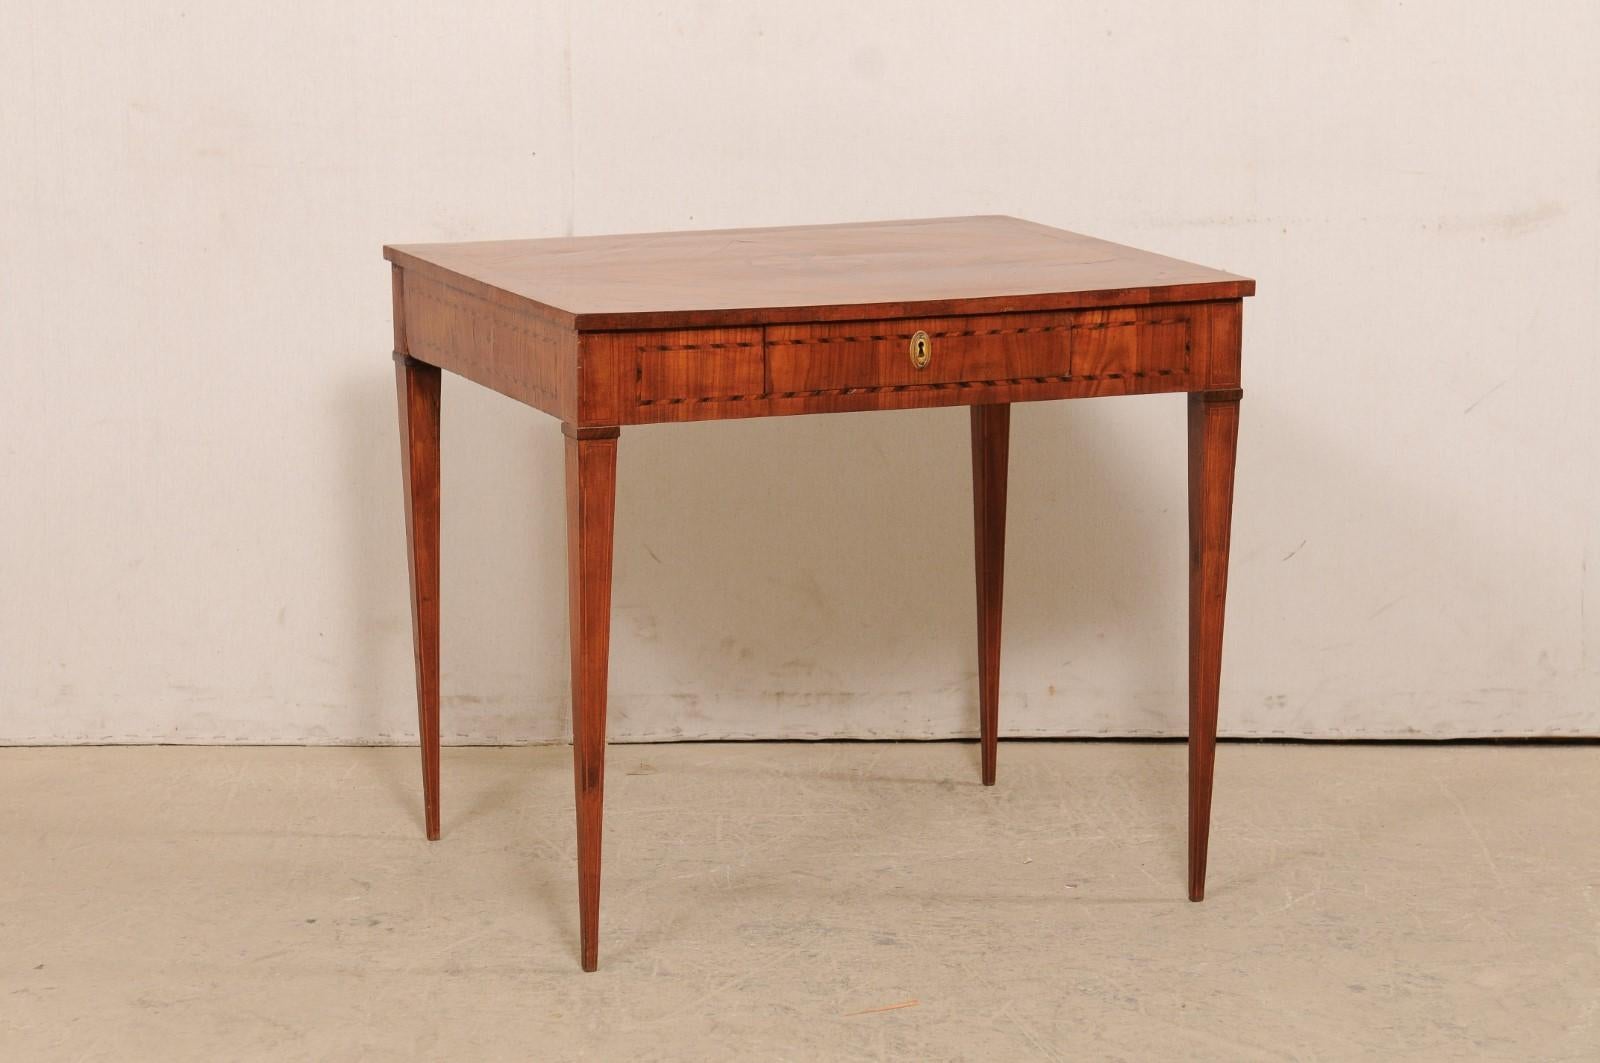 An Italian occasional table or small writing desk from the early 19th century. This antique table from Italy is beautifully decorated with a fanned medallion inlay featured prominently at it's top center, and a ribbon banding inlay outlines the top